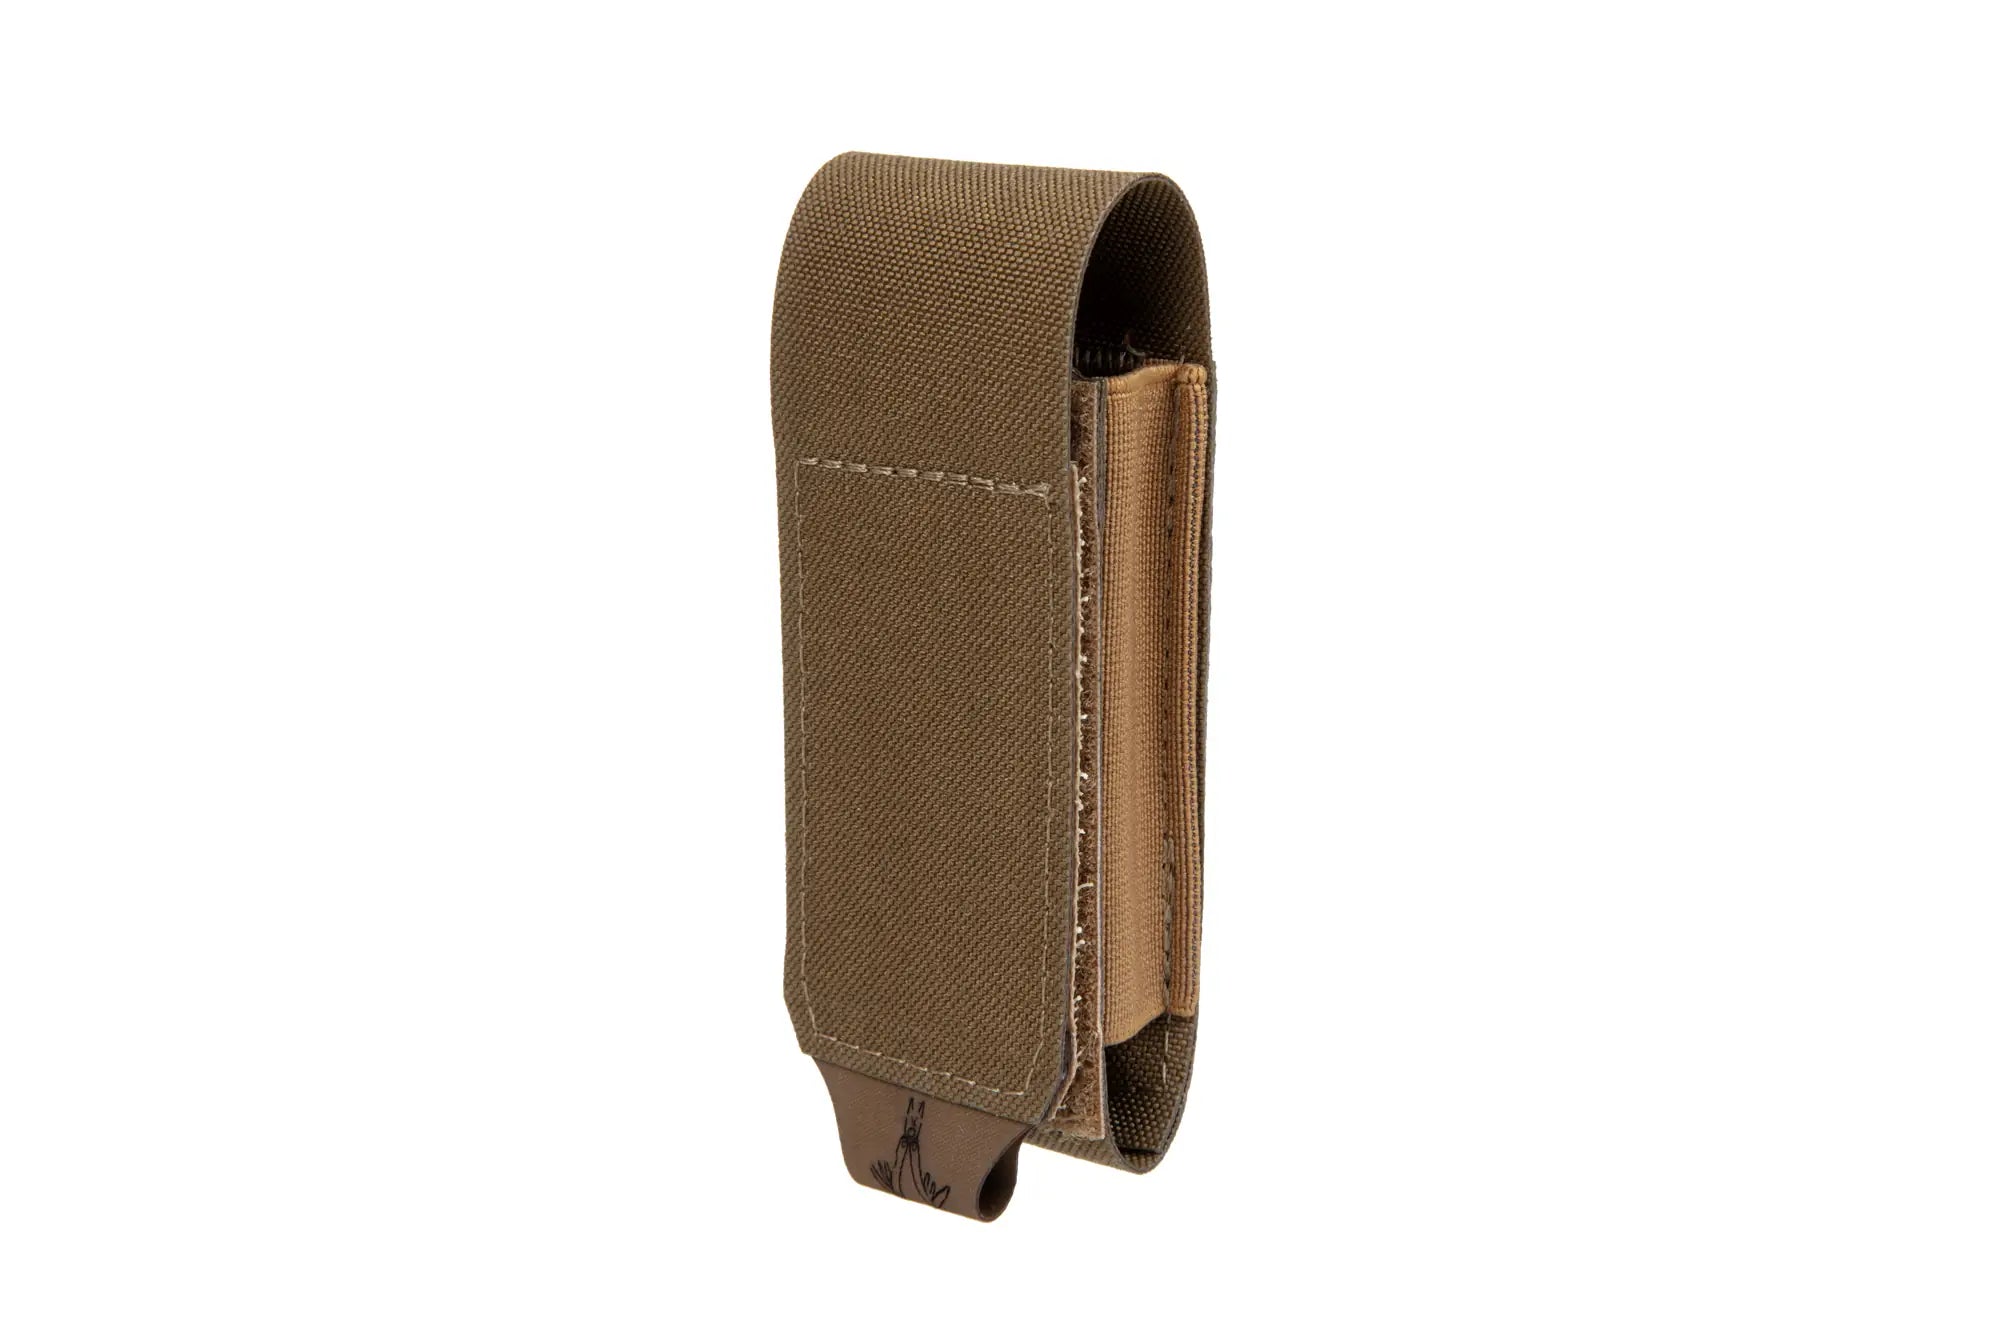 Multitool Pouch - Coyote Brown